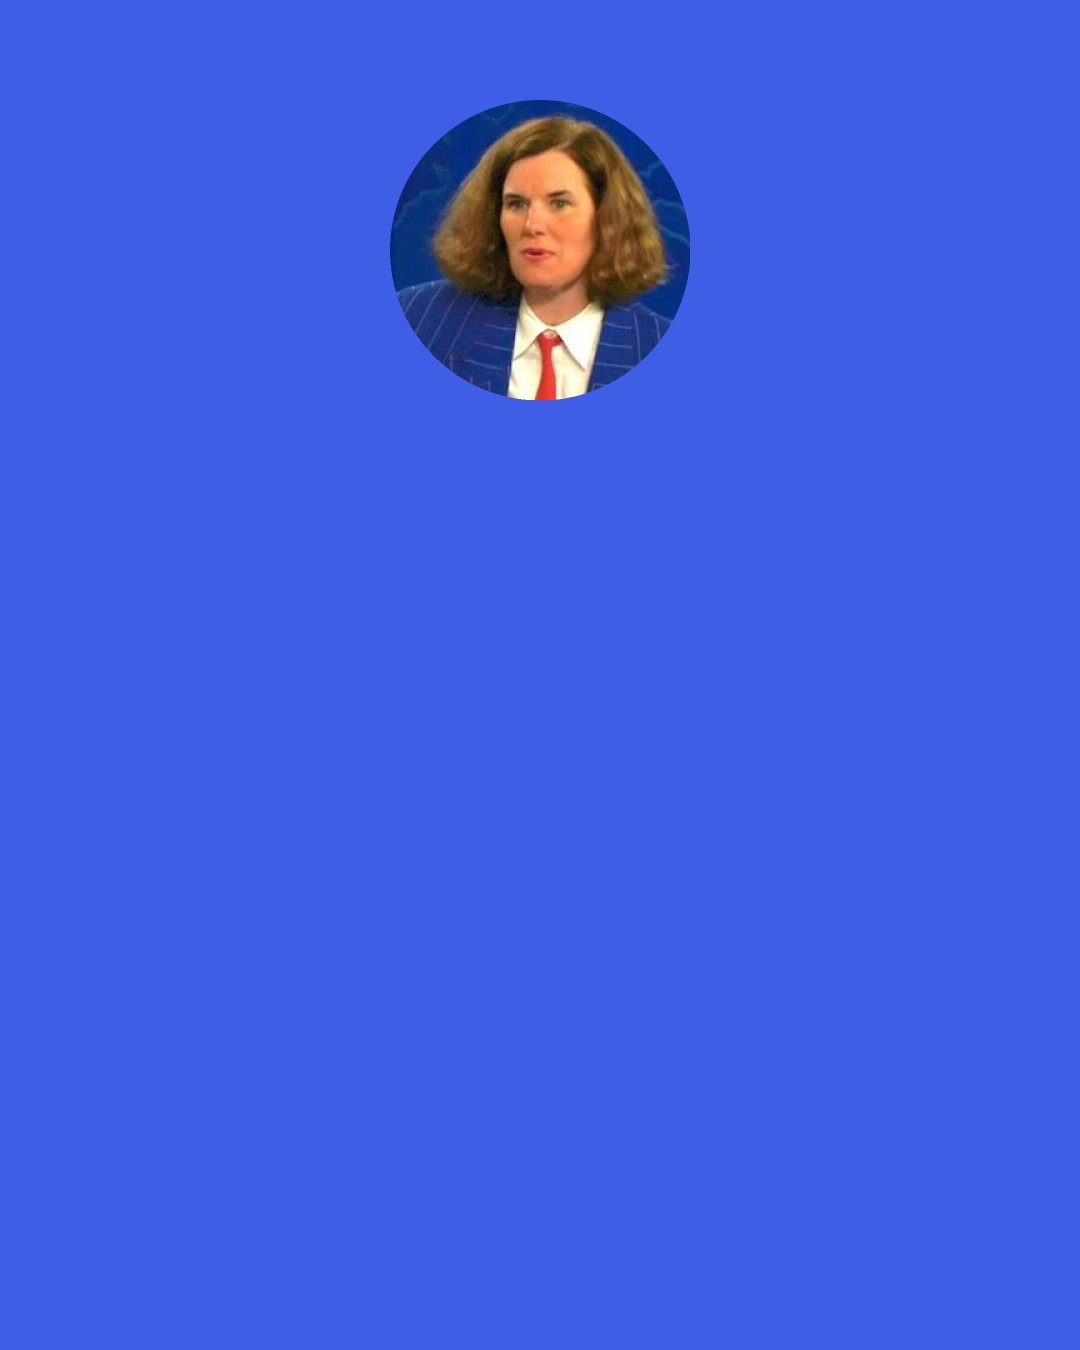 Paula Poundstone: I don’t believe for a second that weightlifting is a sport. They pick up a heavy thing and put it down again. To me, that’s indecision.